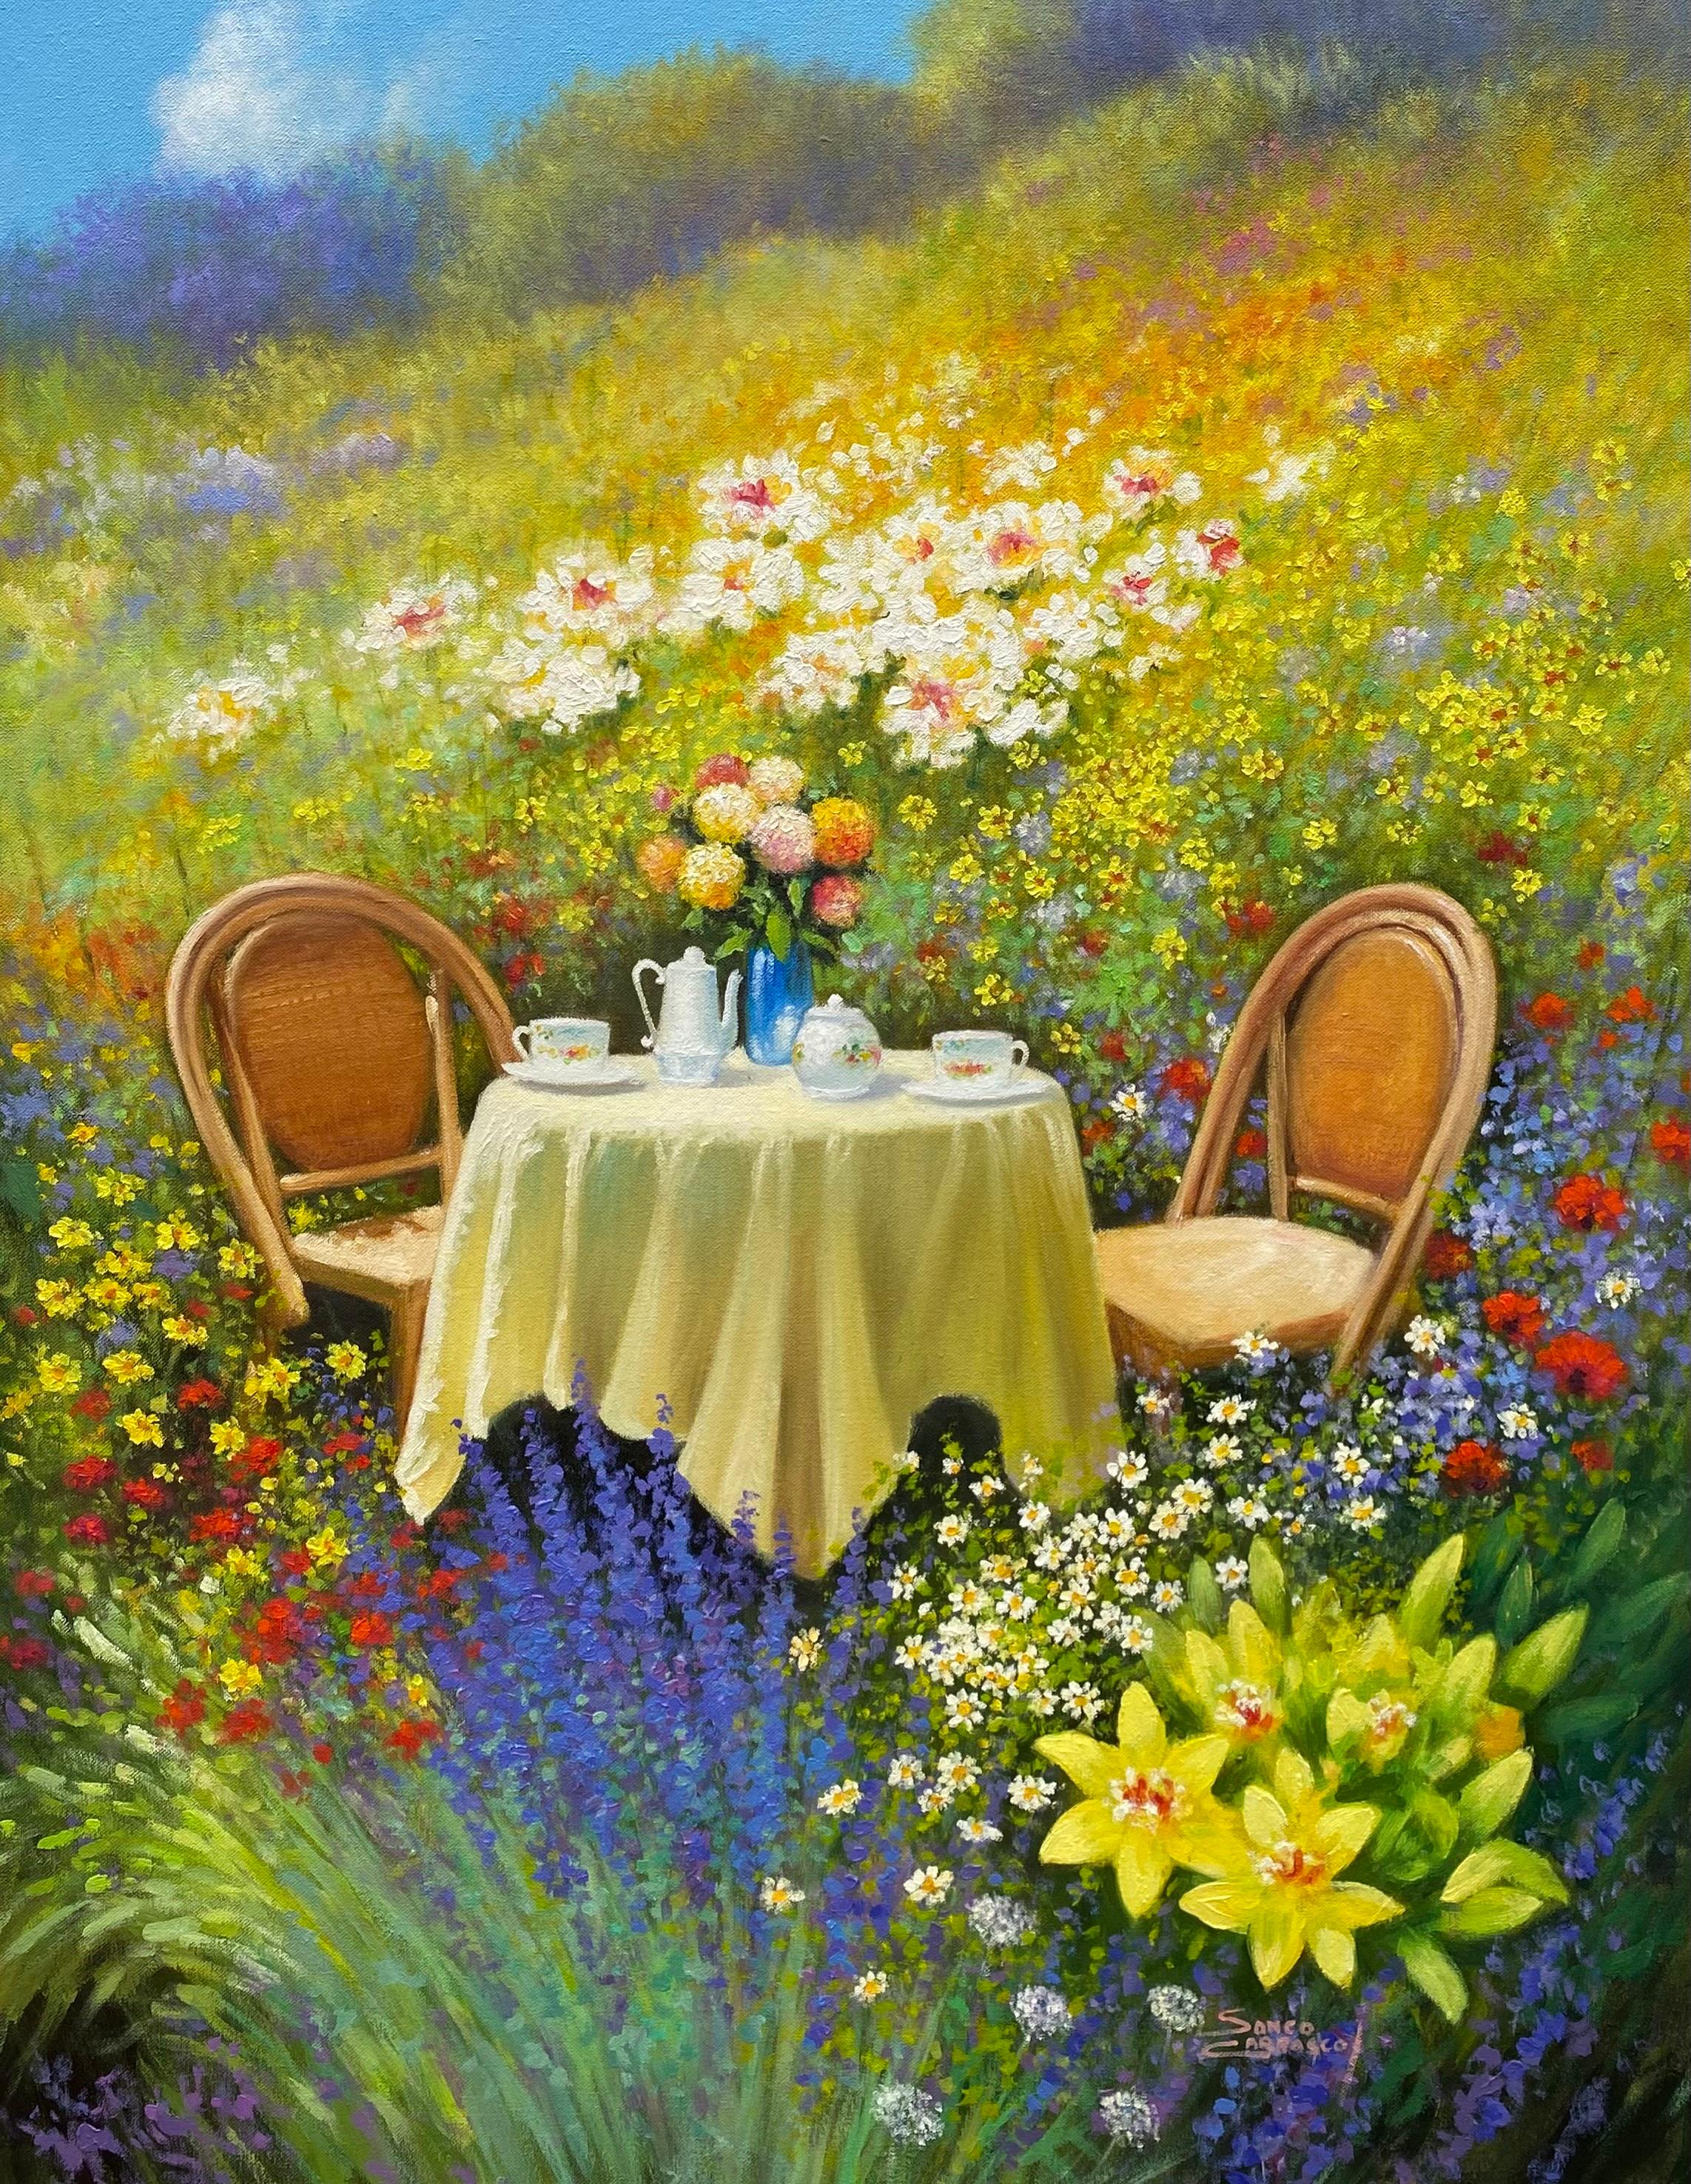 Tea Time-original impressionism floral landscape-still life oil painting-artwork - Painting by Sonco Carrasco